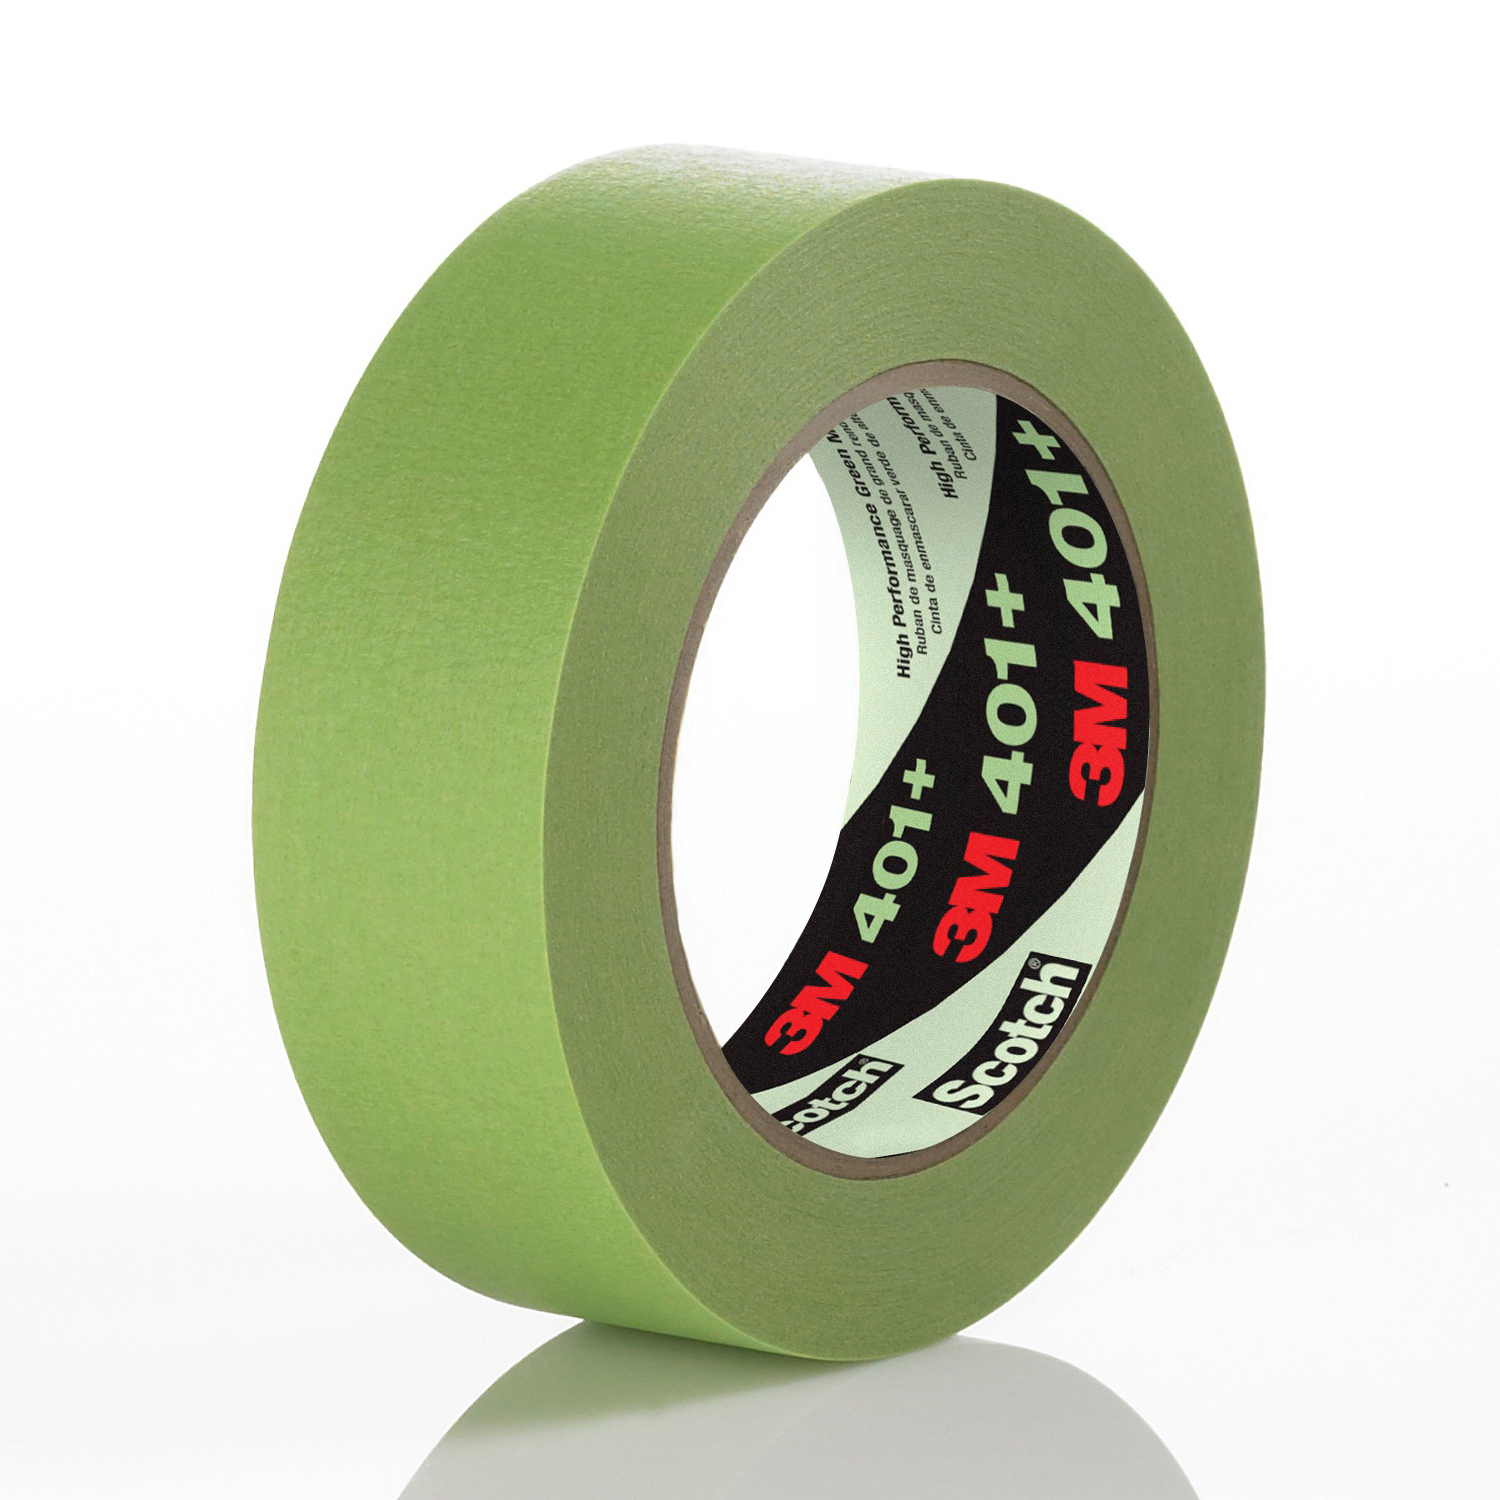 3M™ 051115-64760 High Performance Masking Tape, 55 m L x 18 mm W, 6.7 mil THK, Natural/Synthetic Rubber Adhesive, Crepe Paper Backing